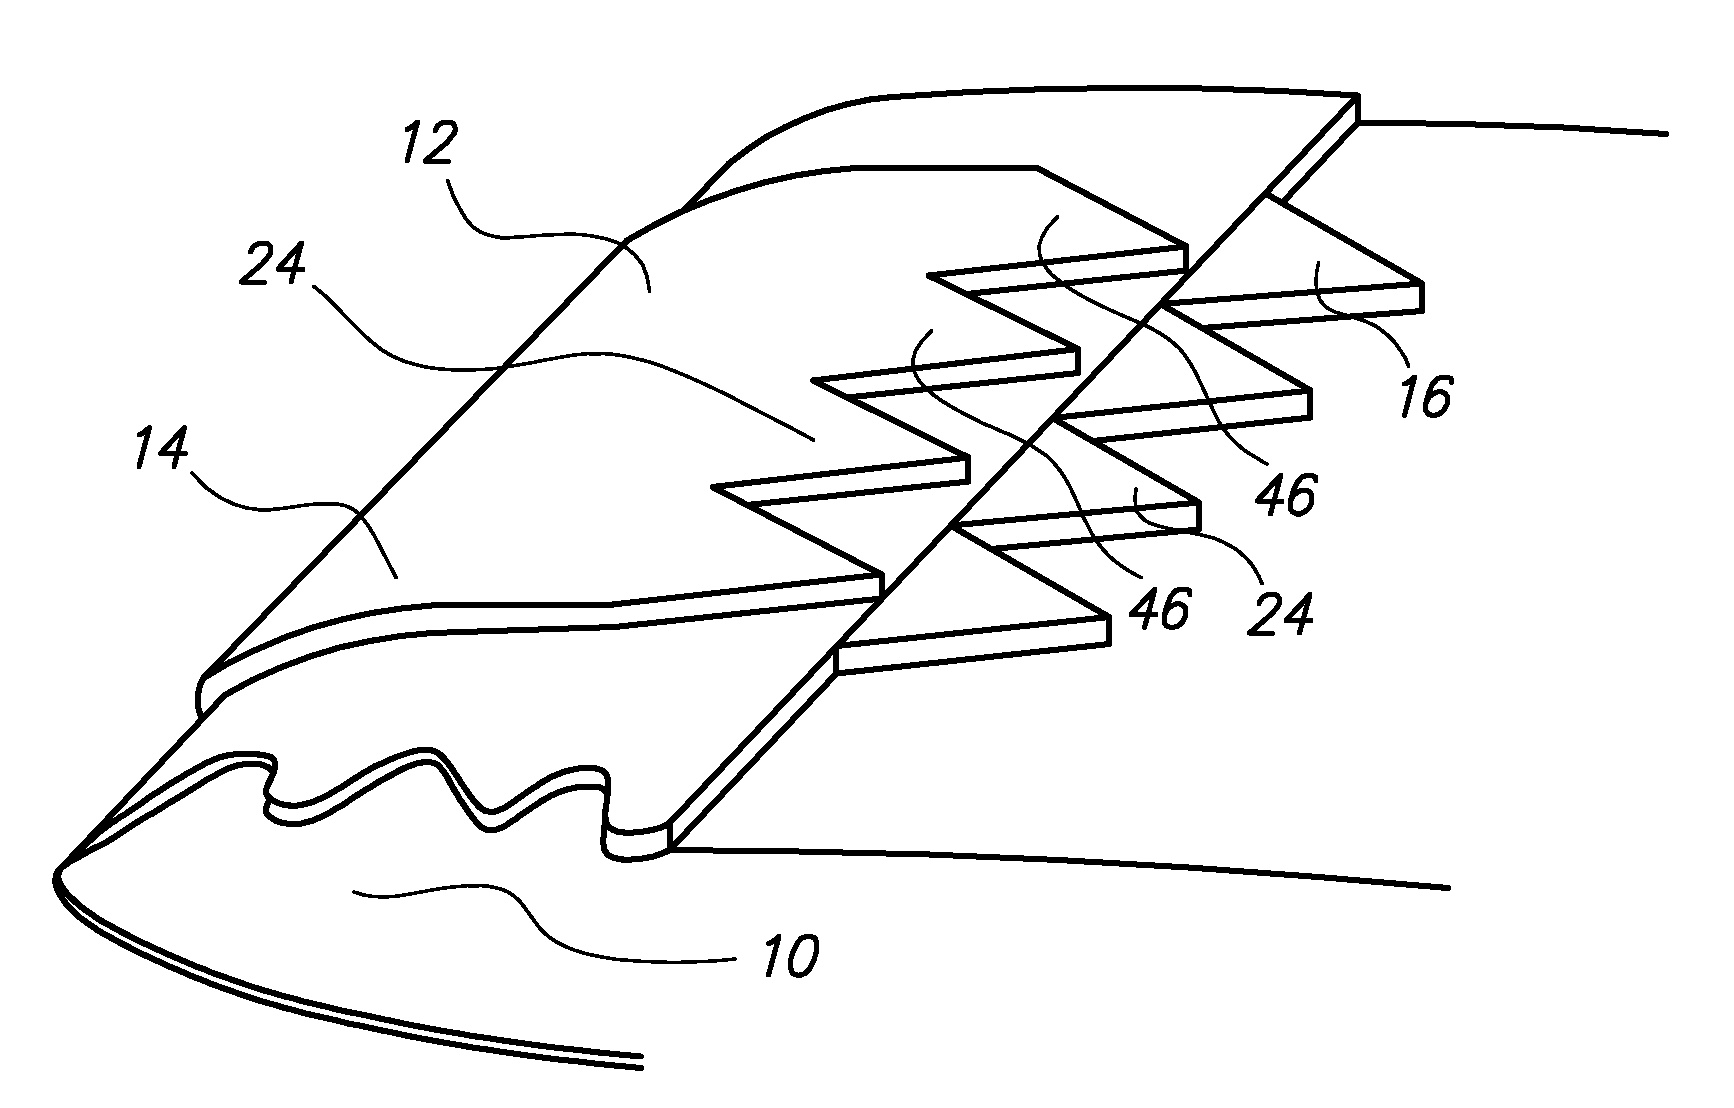 Application of conformal sub boundary layer vortex generators to a foil or aero/ hydrodynamic surface